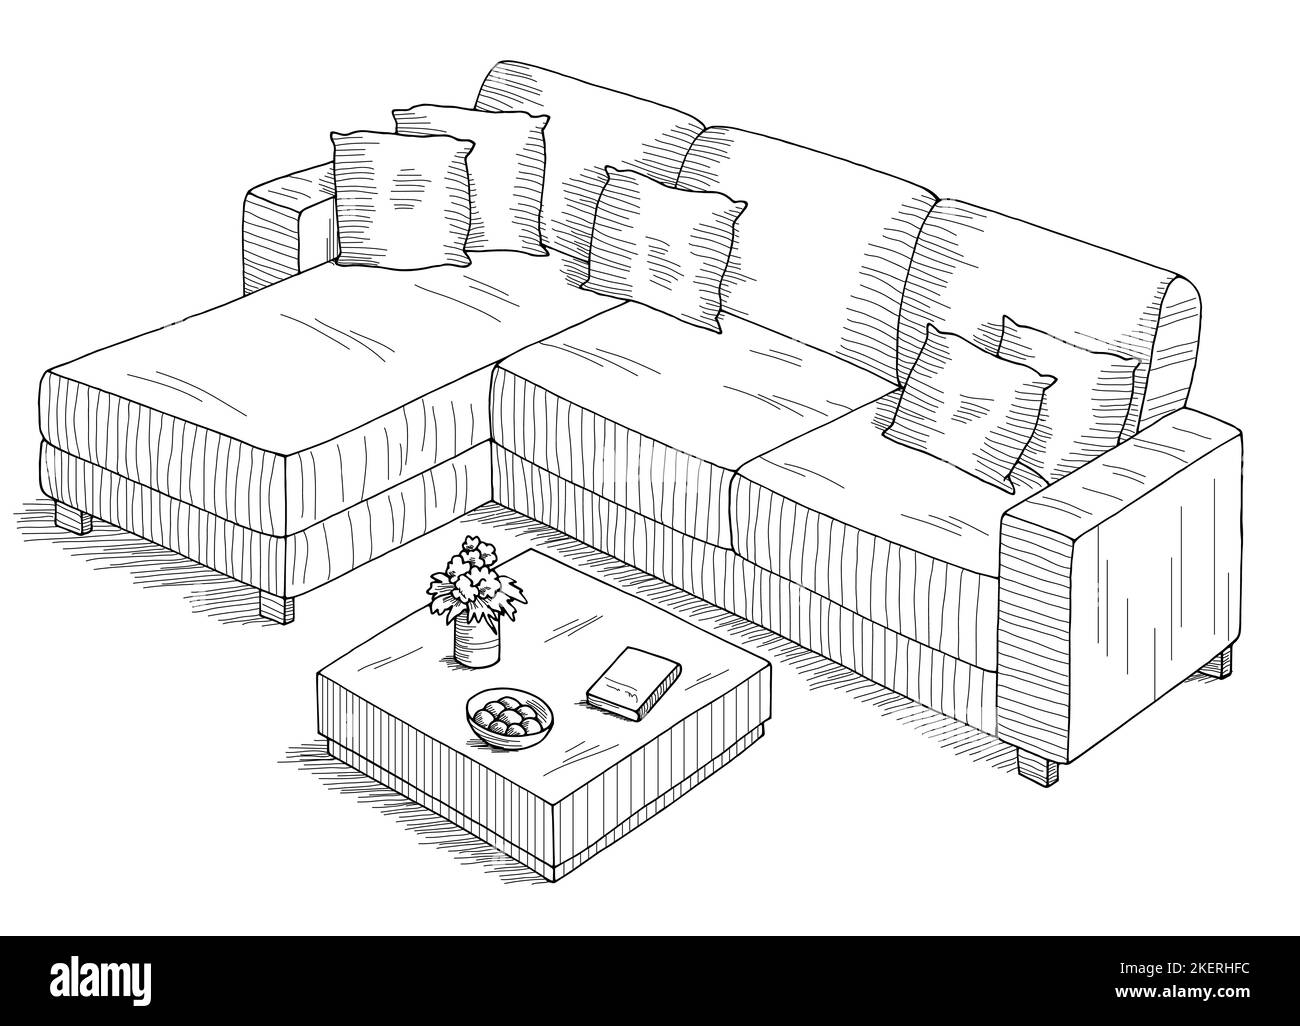 Living room graphic black white interior isolated sketch illustration vector Stock Vector